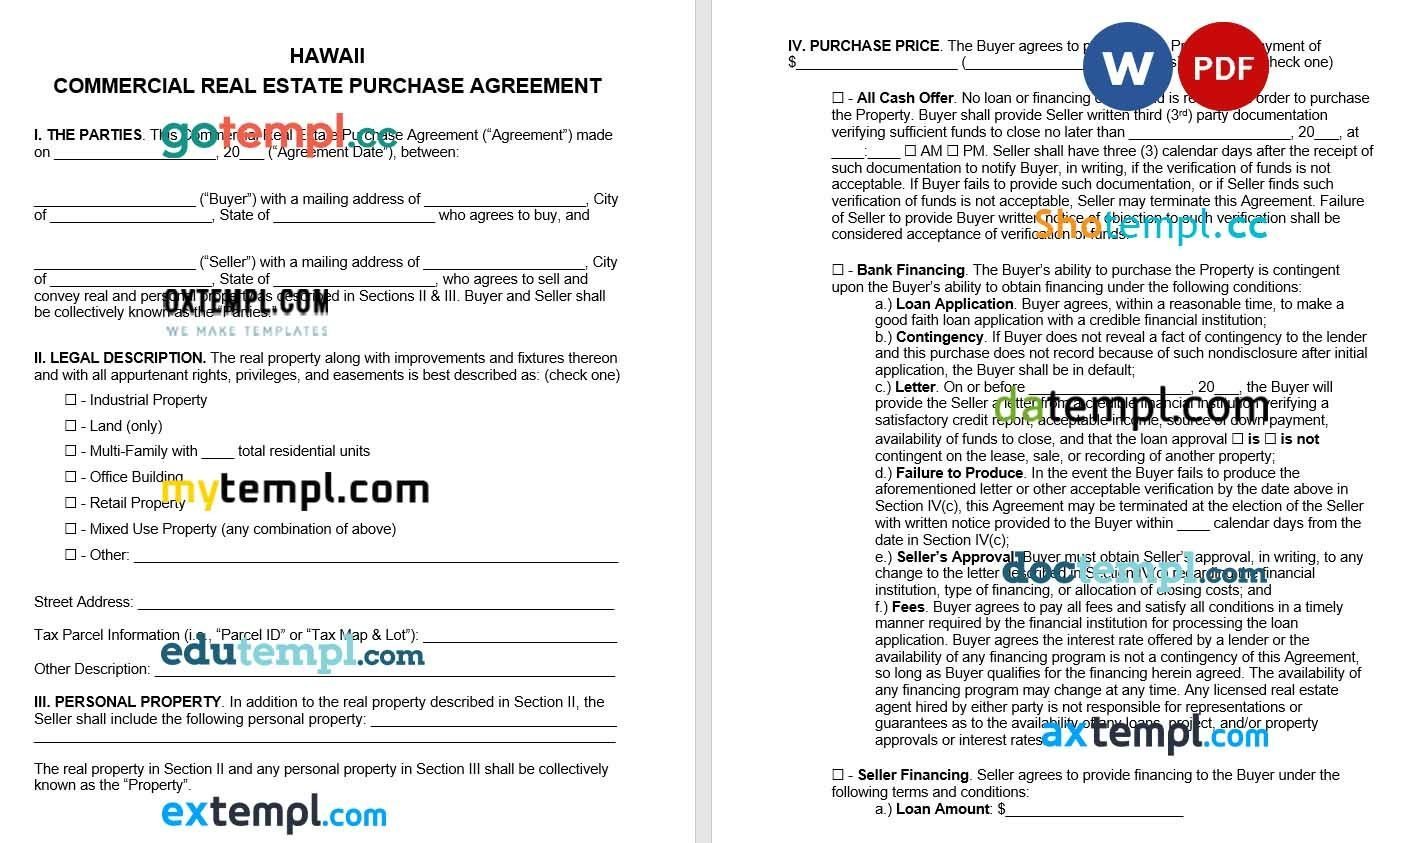 Hawaii Commercial Real Estate Purchase Agreement Word example, fully editable